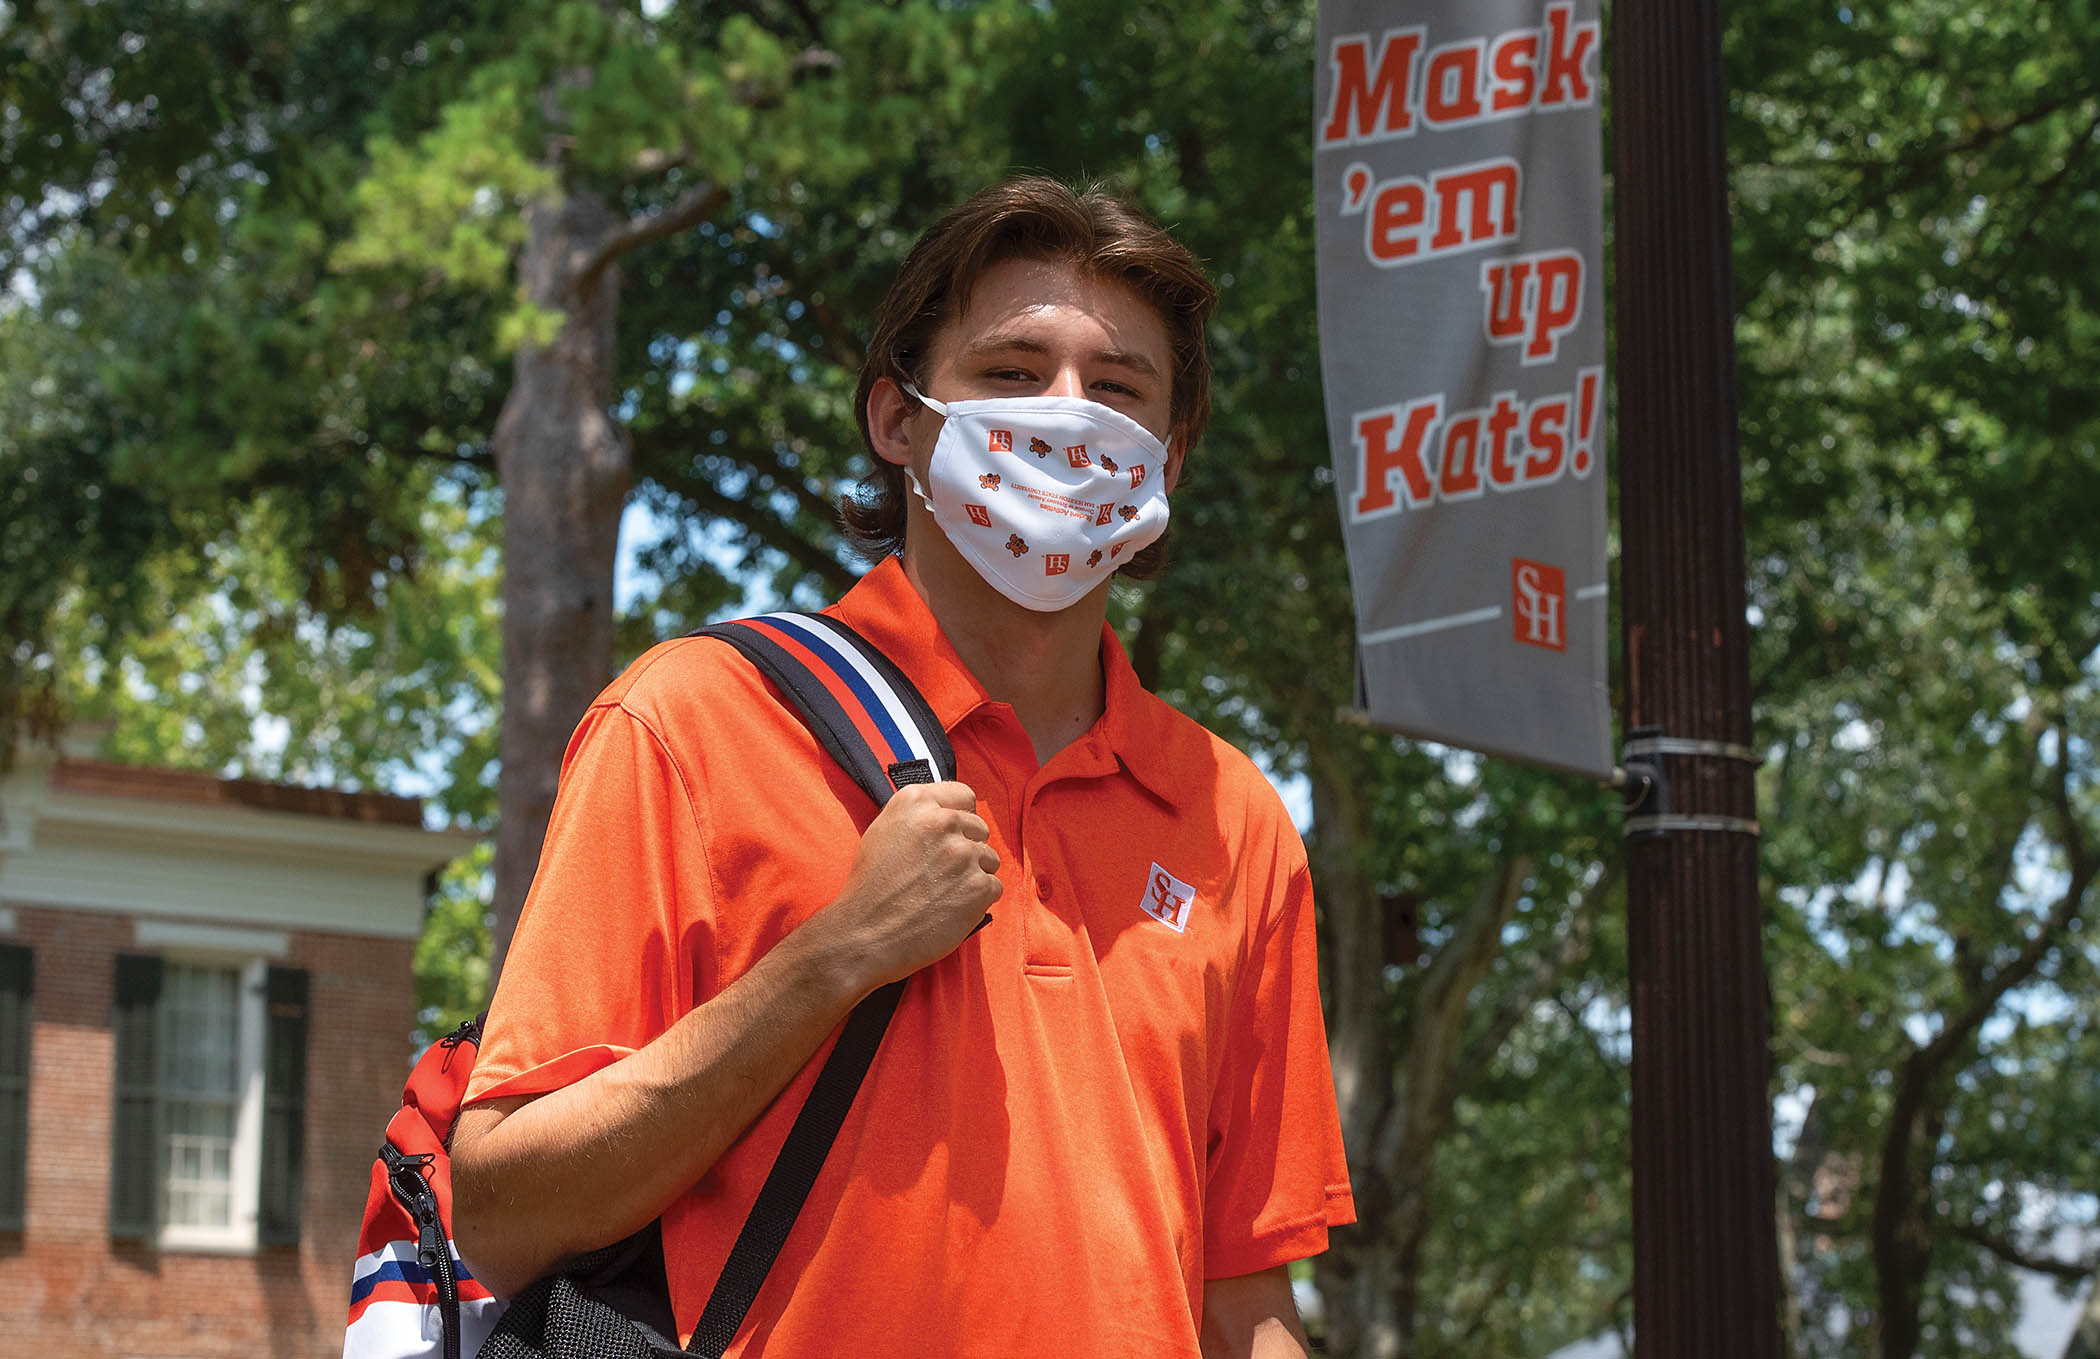 Student on campus wearing a mask